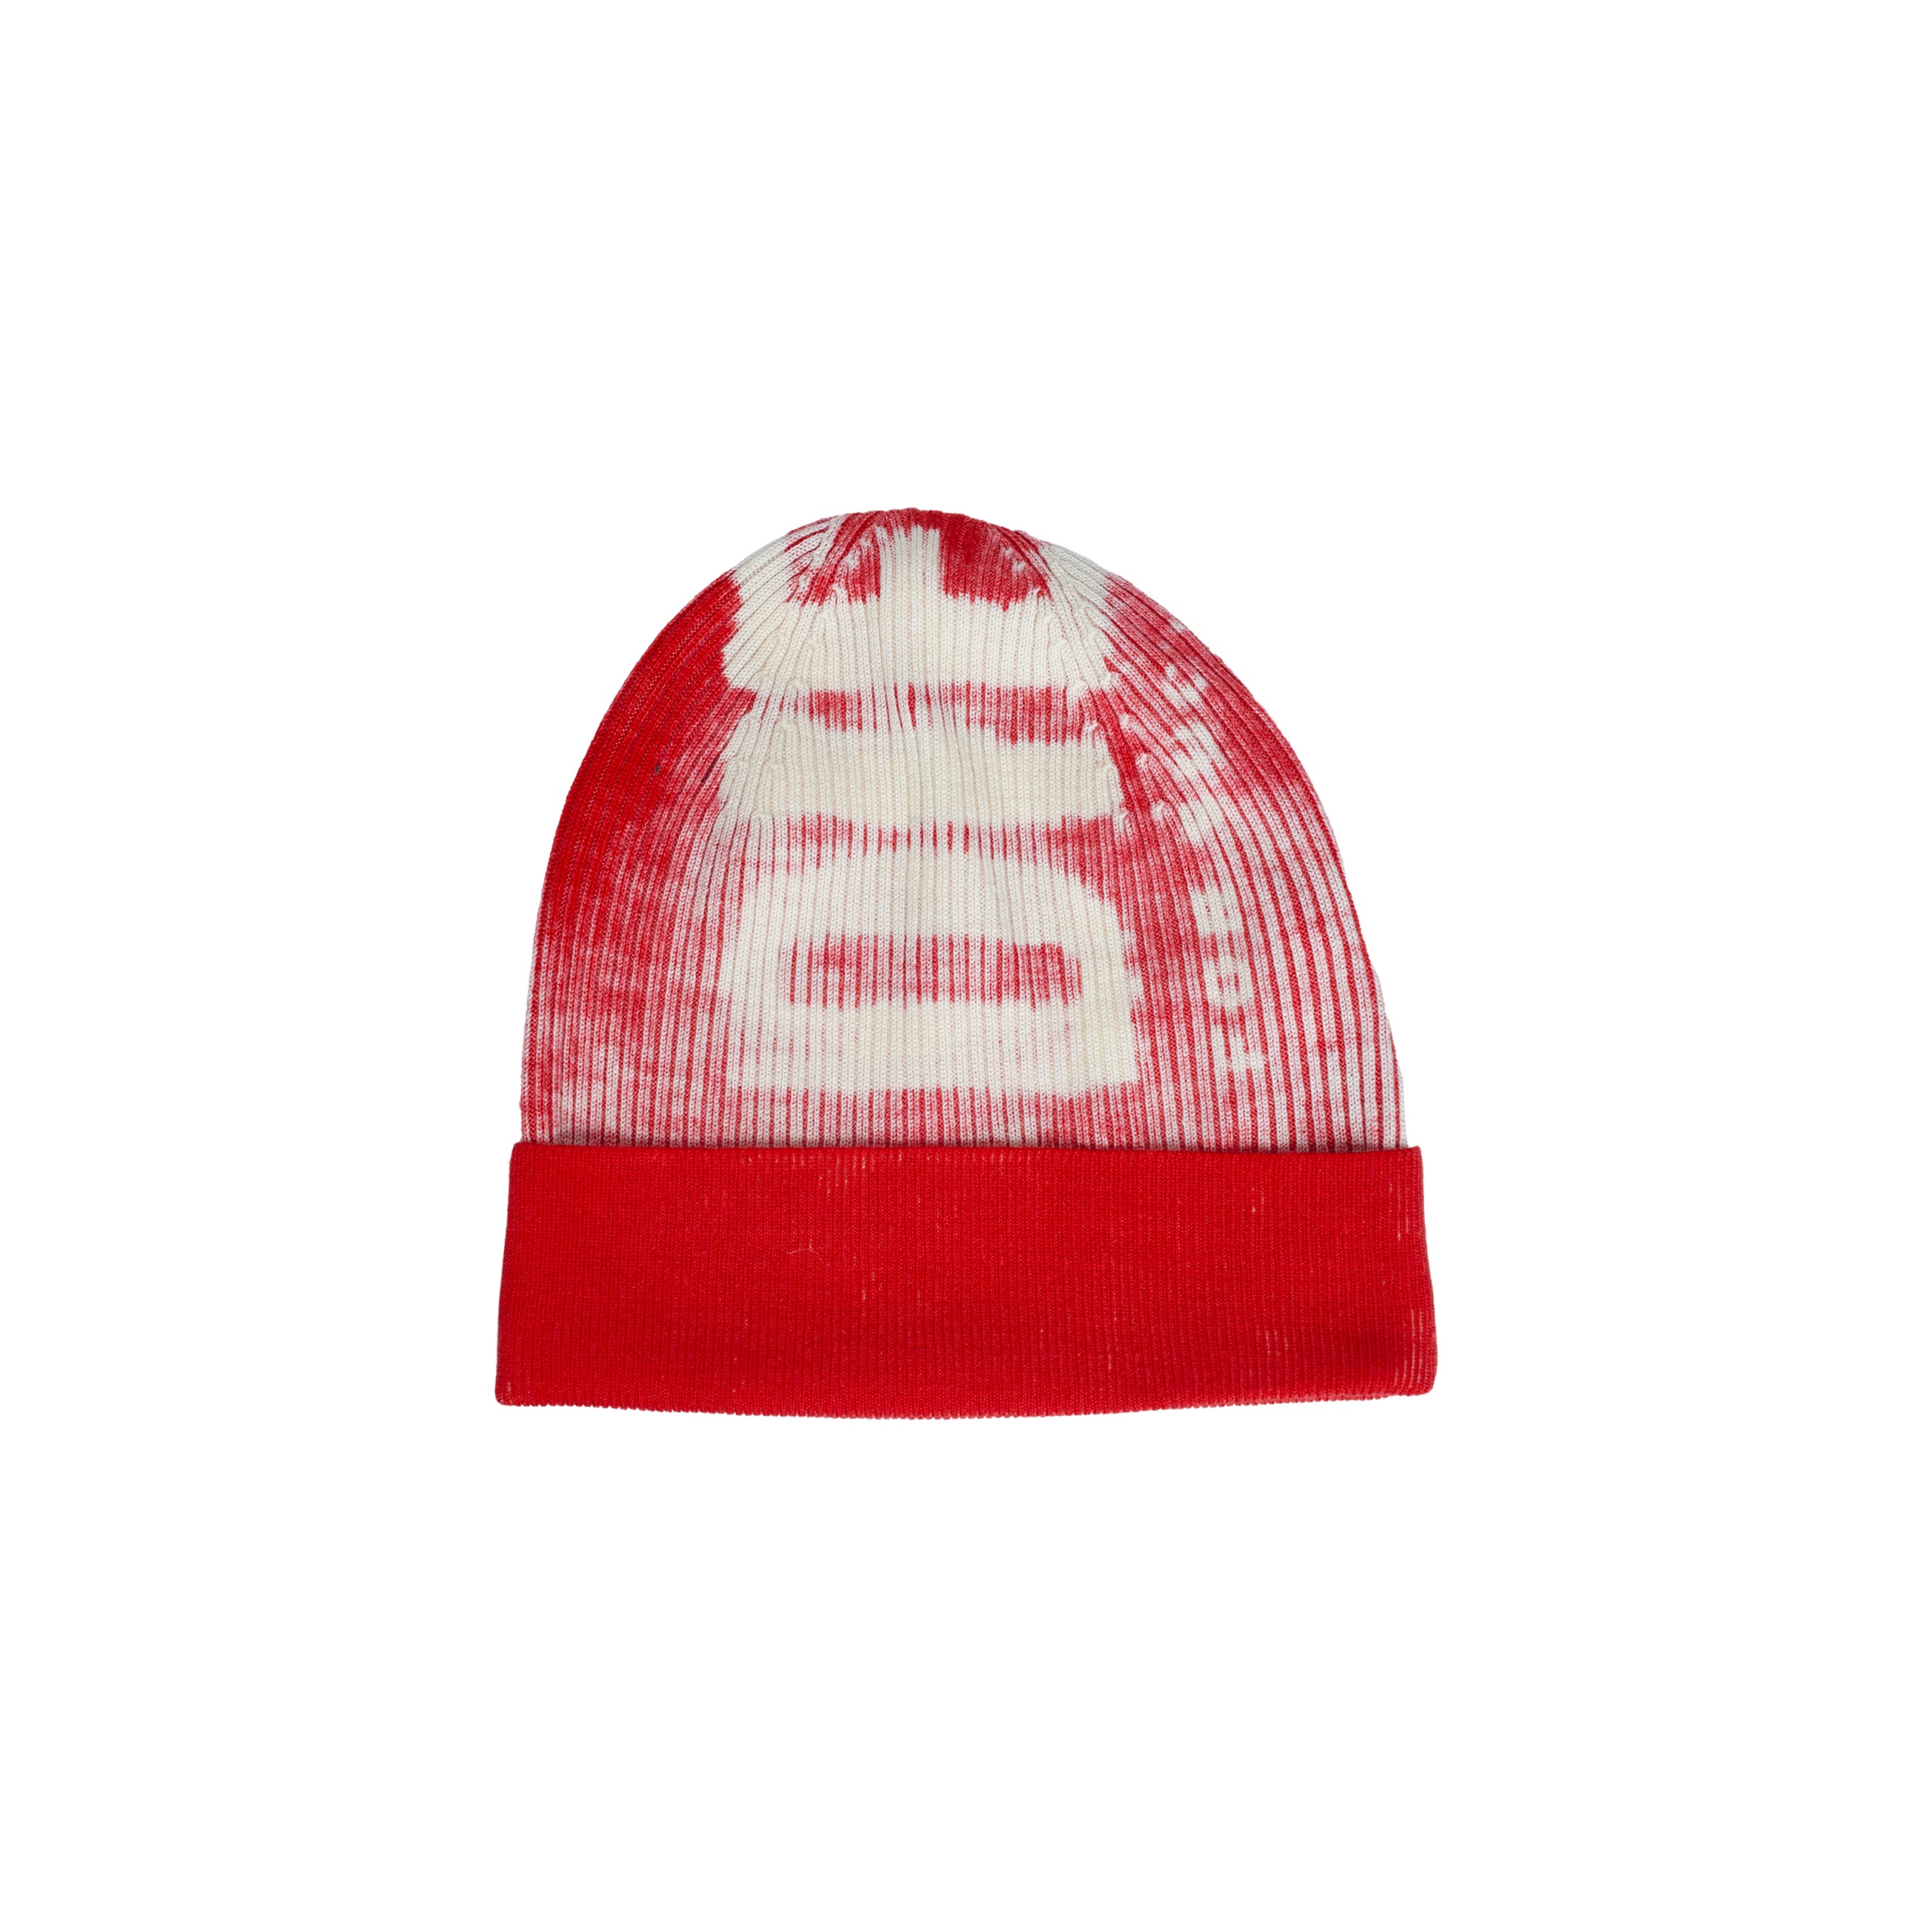 RED WOOL BEANIE WITH LOGO - 3